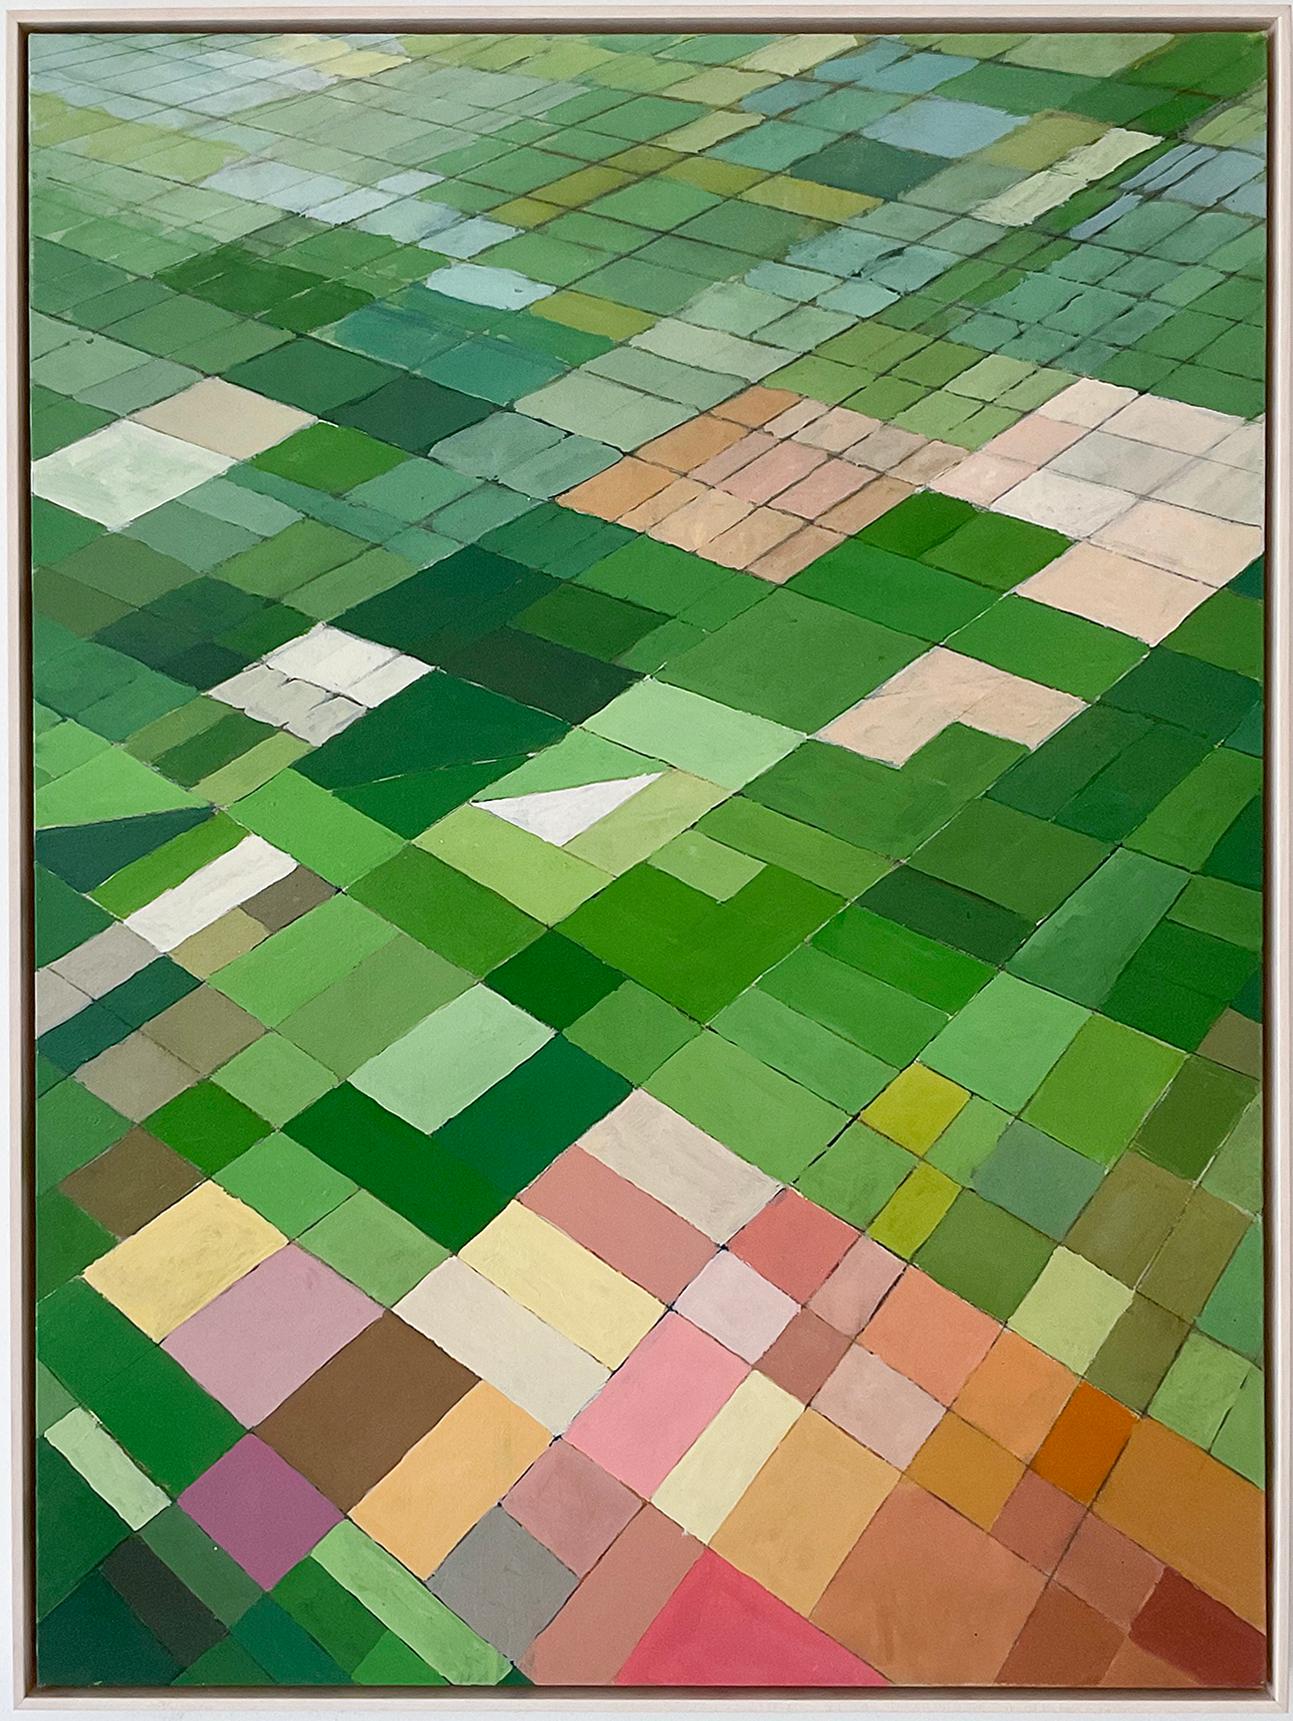 Merced (Abstract Geometric Aerial Landscape Oil Painting of Farm Fields) - Mixed Media Art by Anthony Finta